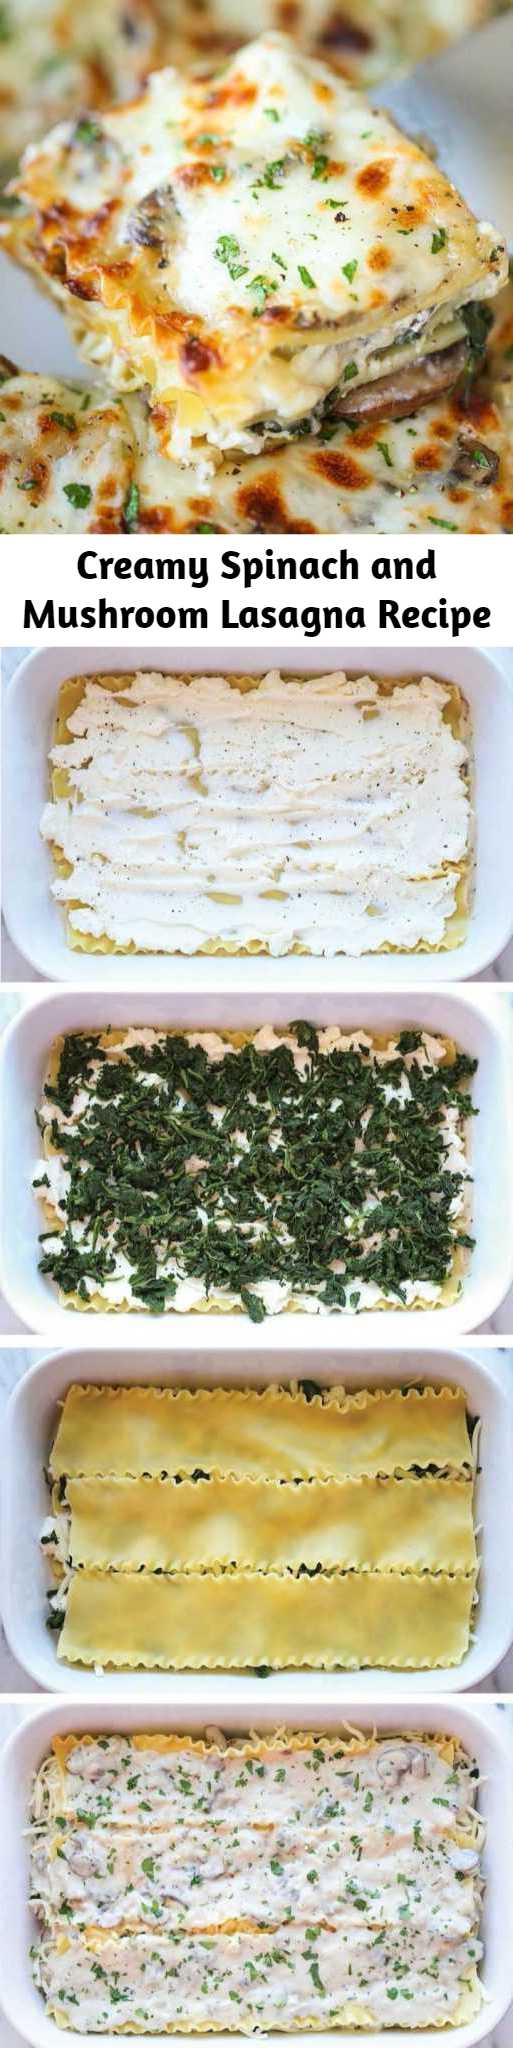 Creamy Spinach and Mushroom Lasagna Recipe - This is sure to become a family favorite. Best of all, it’s freezer-friendly and can also be made ahead of time!